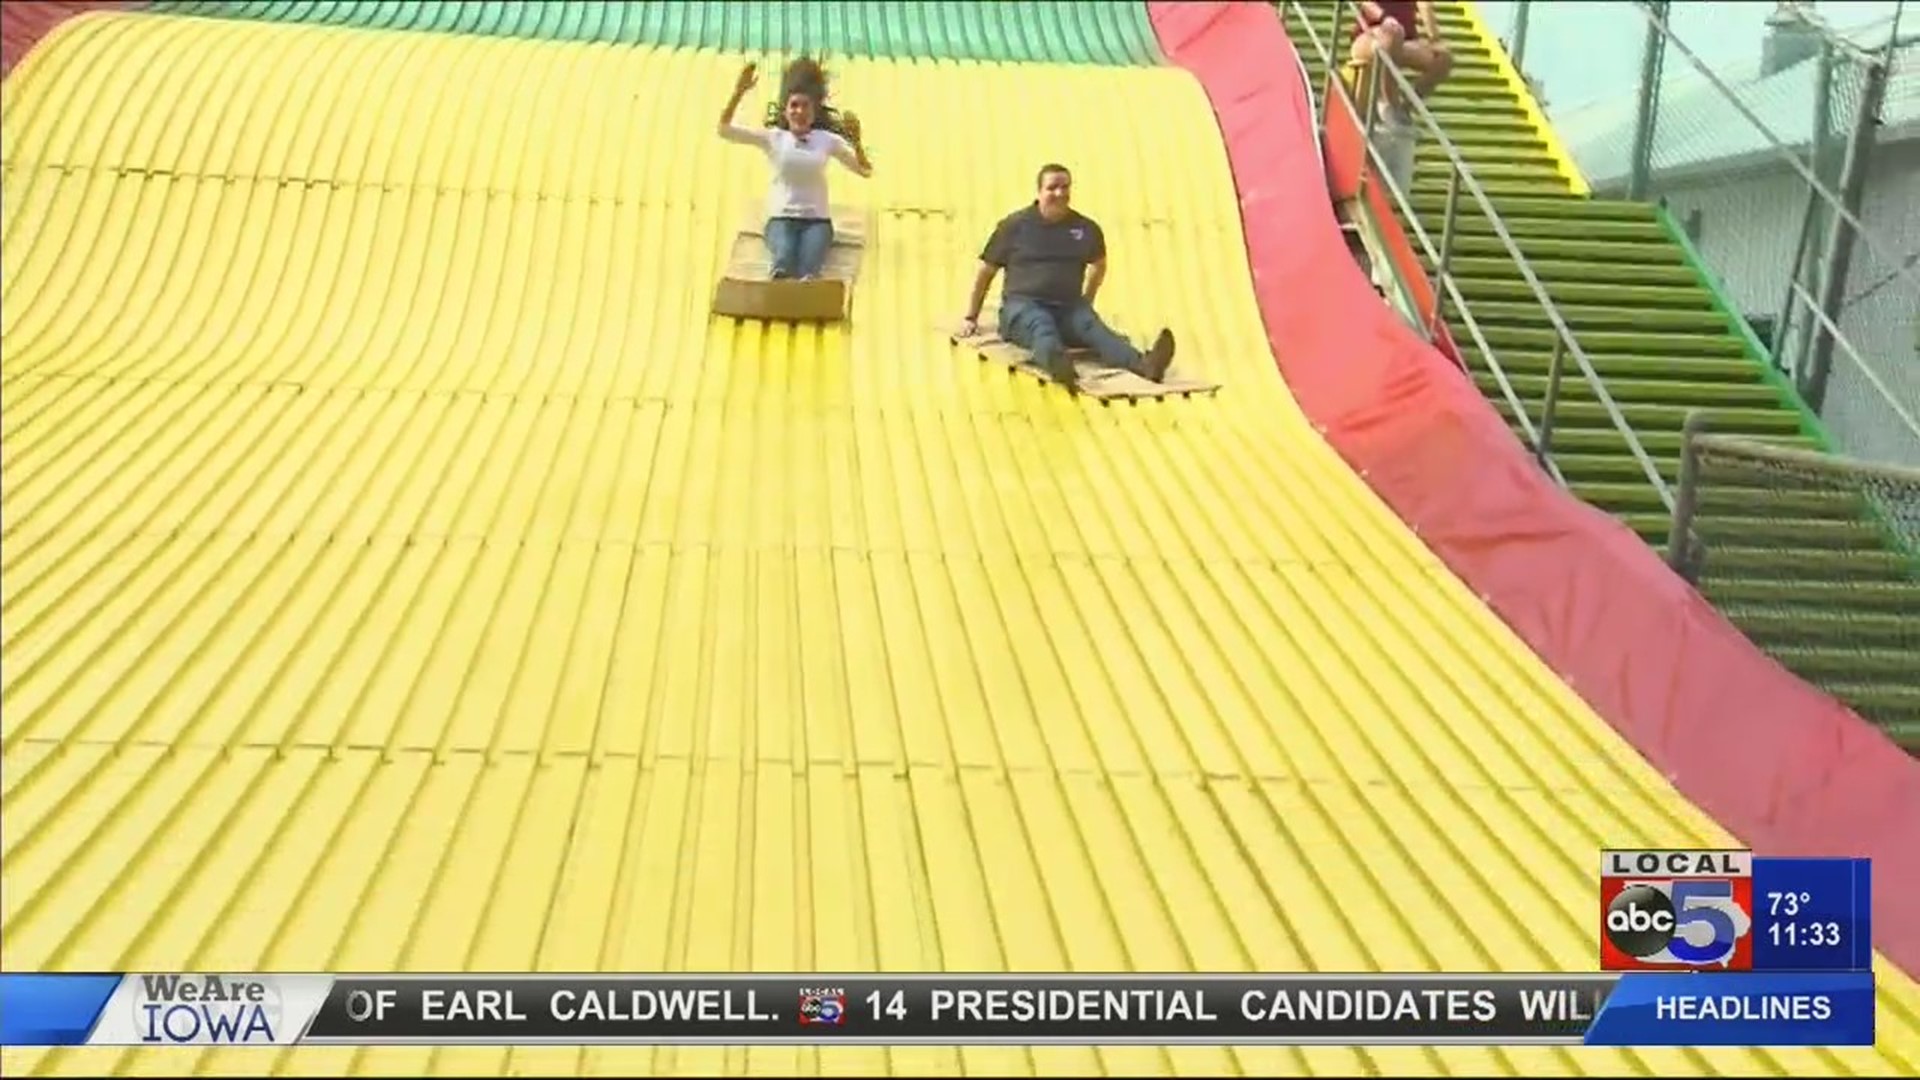 Kicking off the 2019 Iowa State Fair at the Local 5 Giant Slide